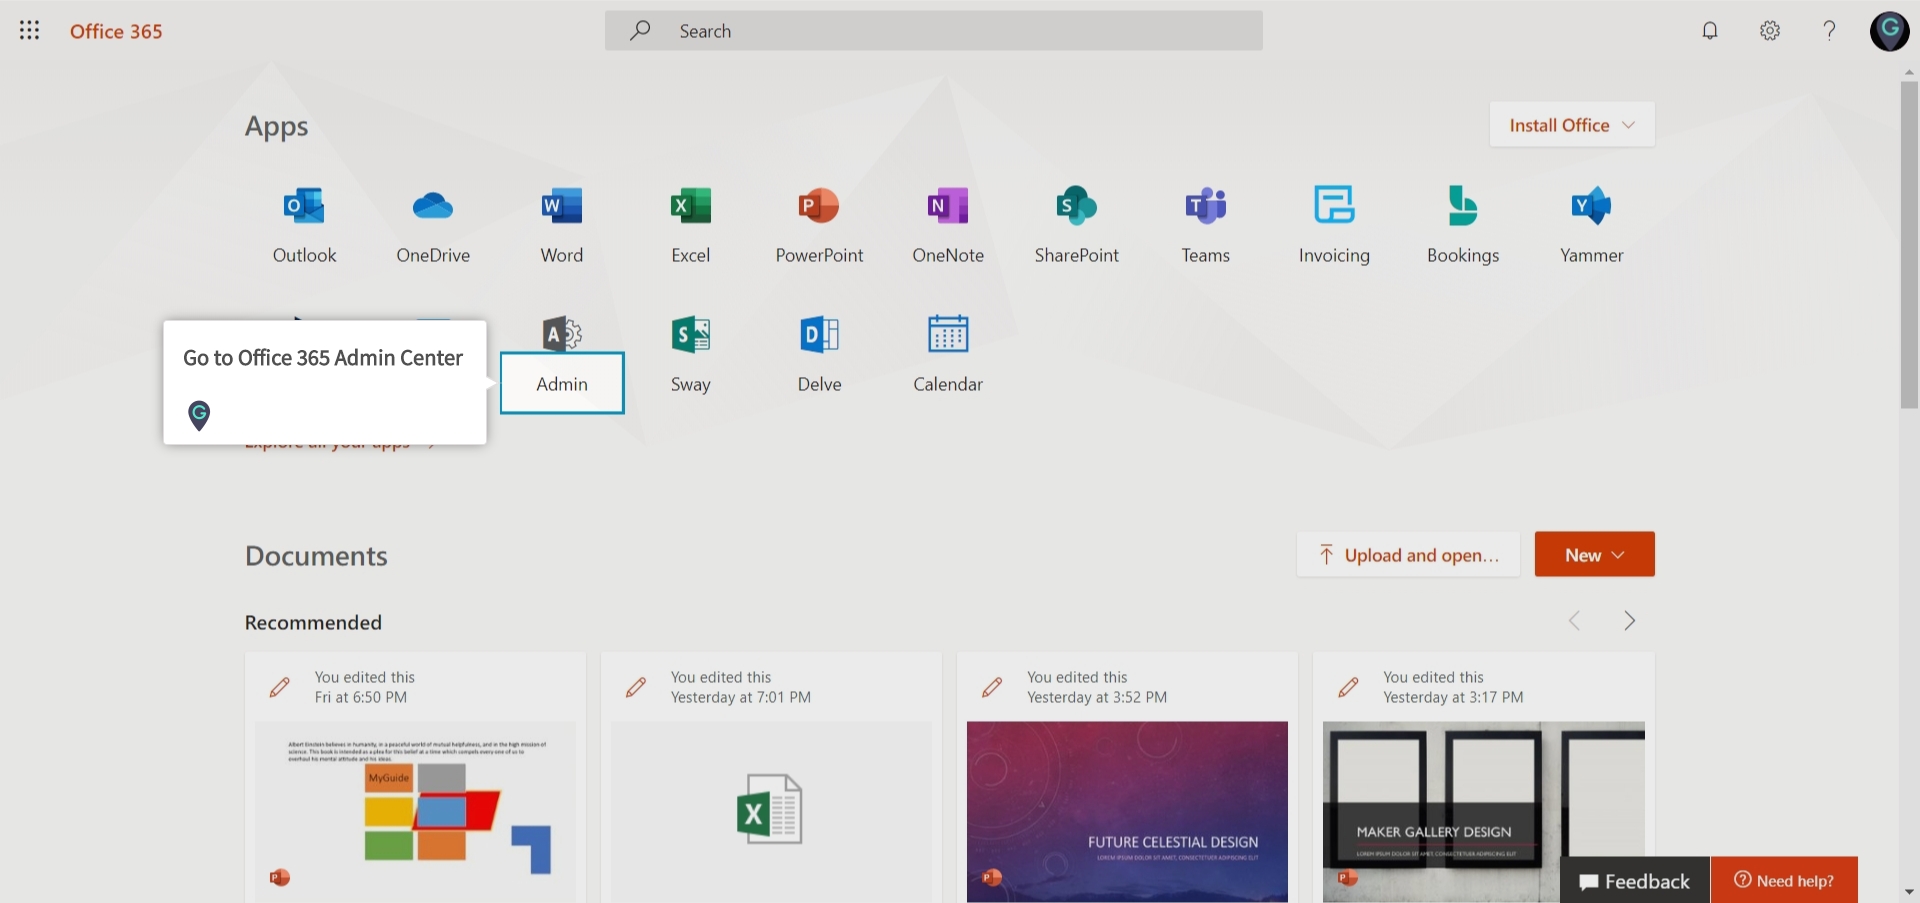 How to customize admin center's home page in Office 365 Admin Center